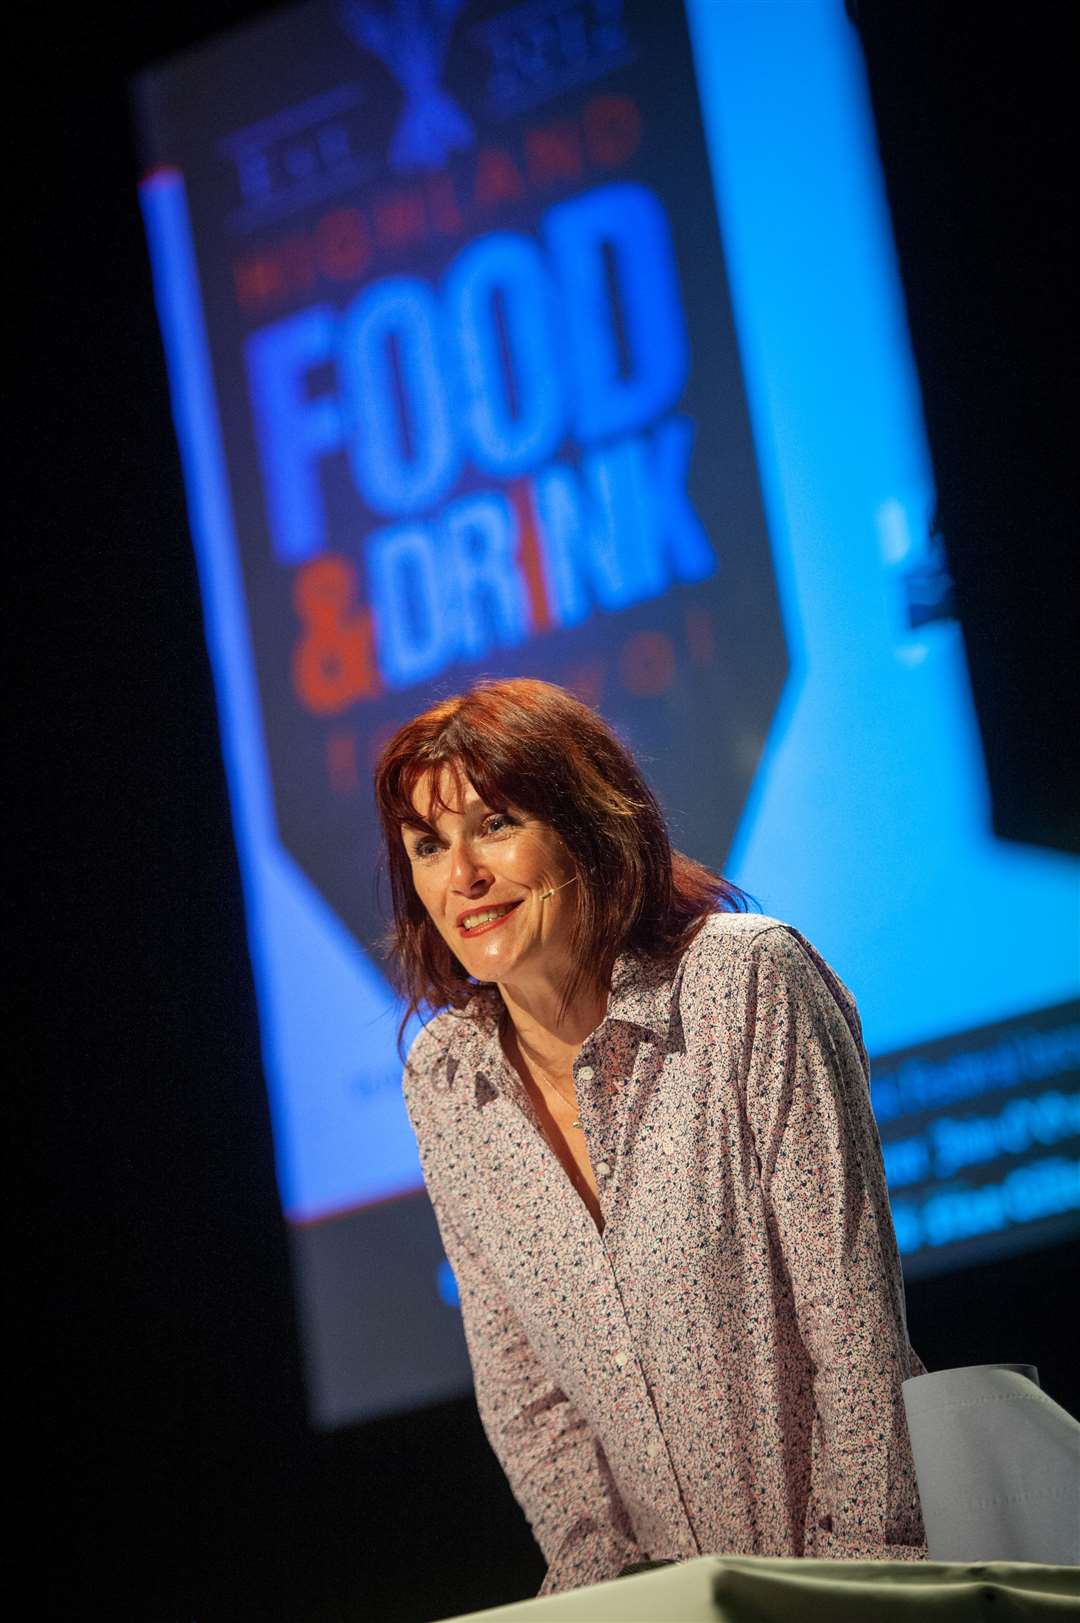 Nicky Marr may host events such as the Highland Food & Drink Festival, but sometimes it's no fun cooking alone. Picture: Callum Mackay/HNM